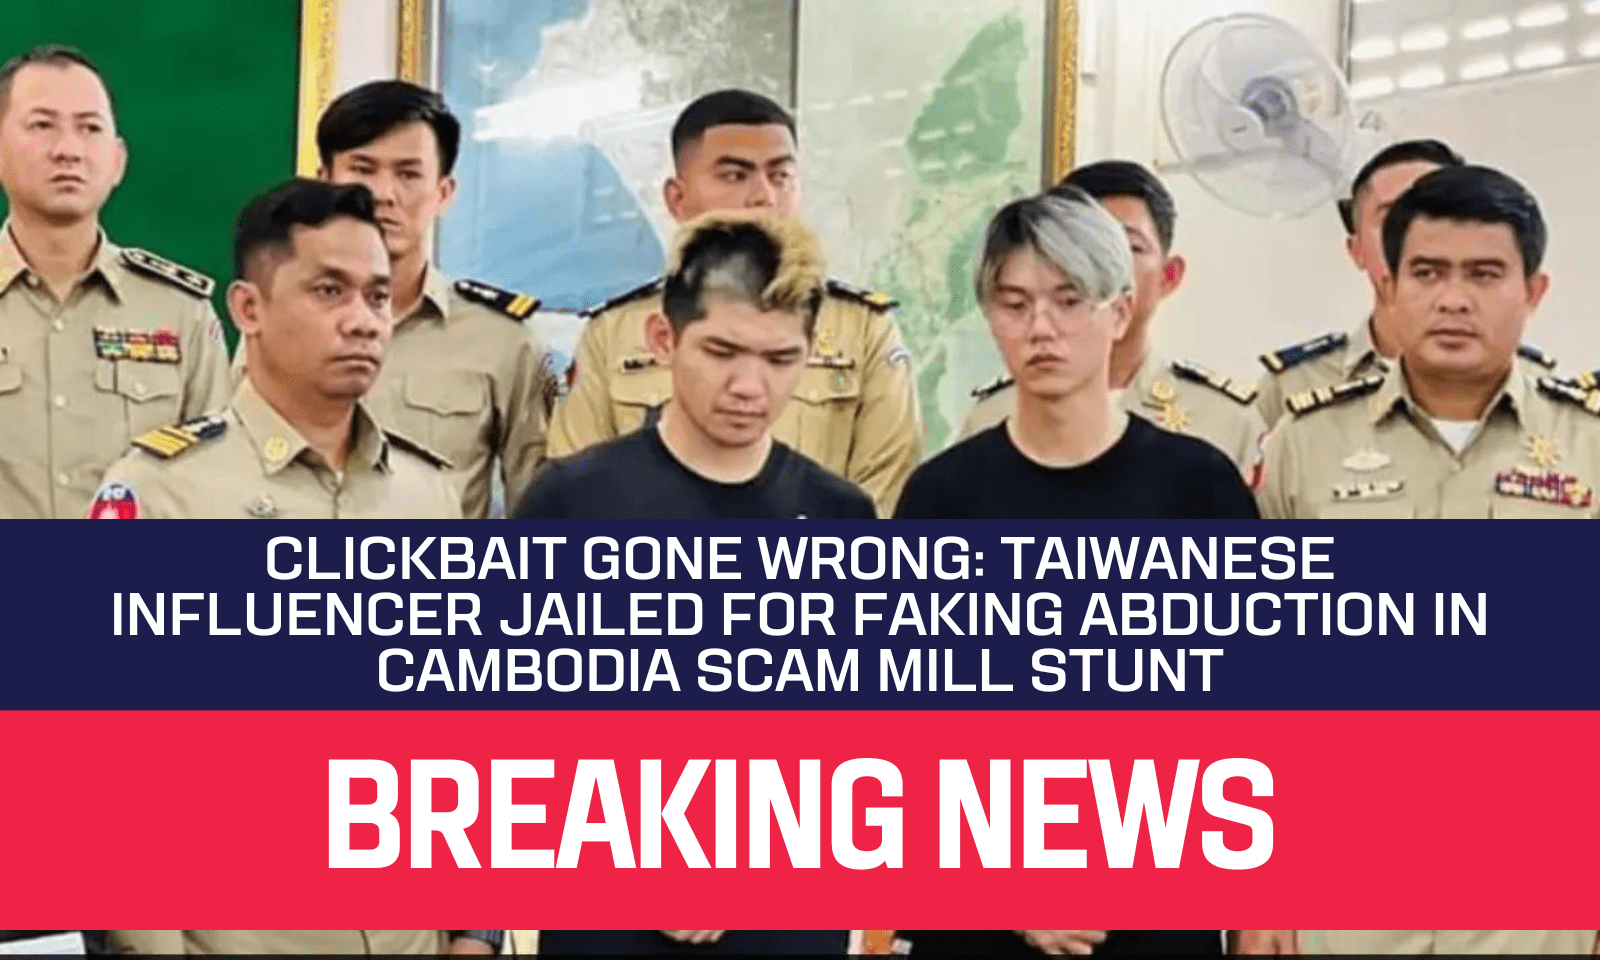 Clickbait Gone Wrong Taiwanese Influencer Jailed for Faking Abduction in Cambodia Scam Mill StuntClickbait Gone Wrong Taiwanese Influencer Jailed for Faking Abduction in Cambodia Scam Mill Stunt